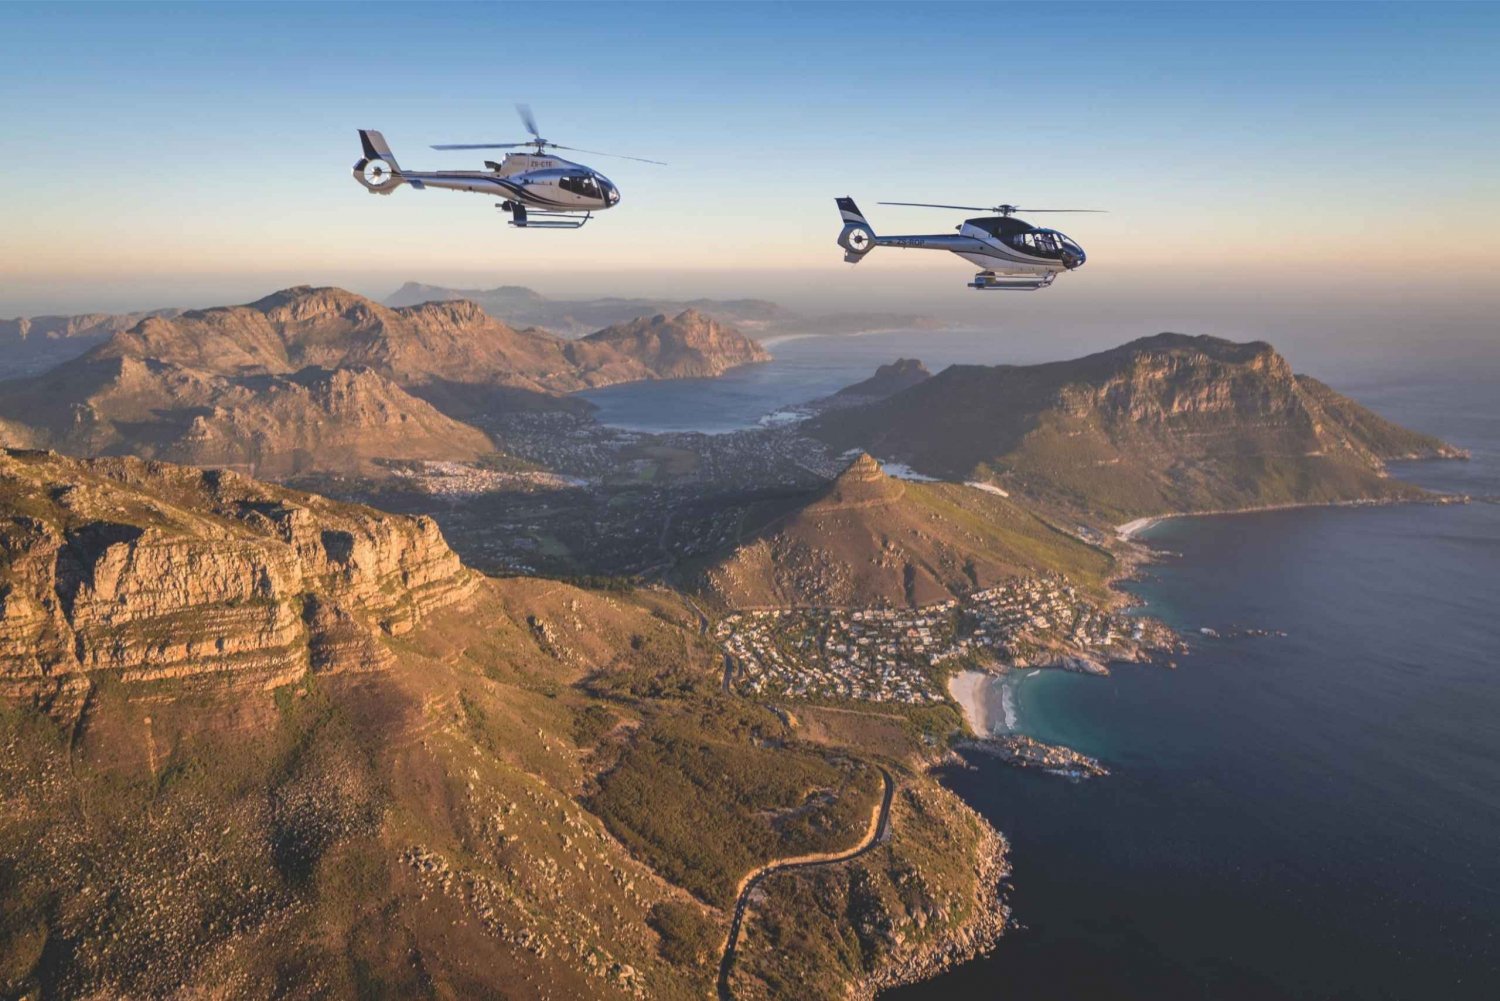 Cape Town: 2 Oceans Helicopter Flight with Boat Tour Ticket